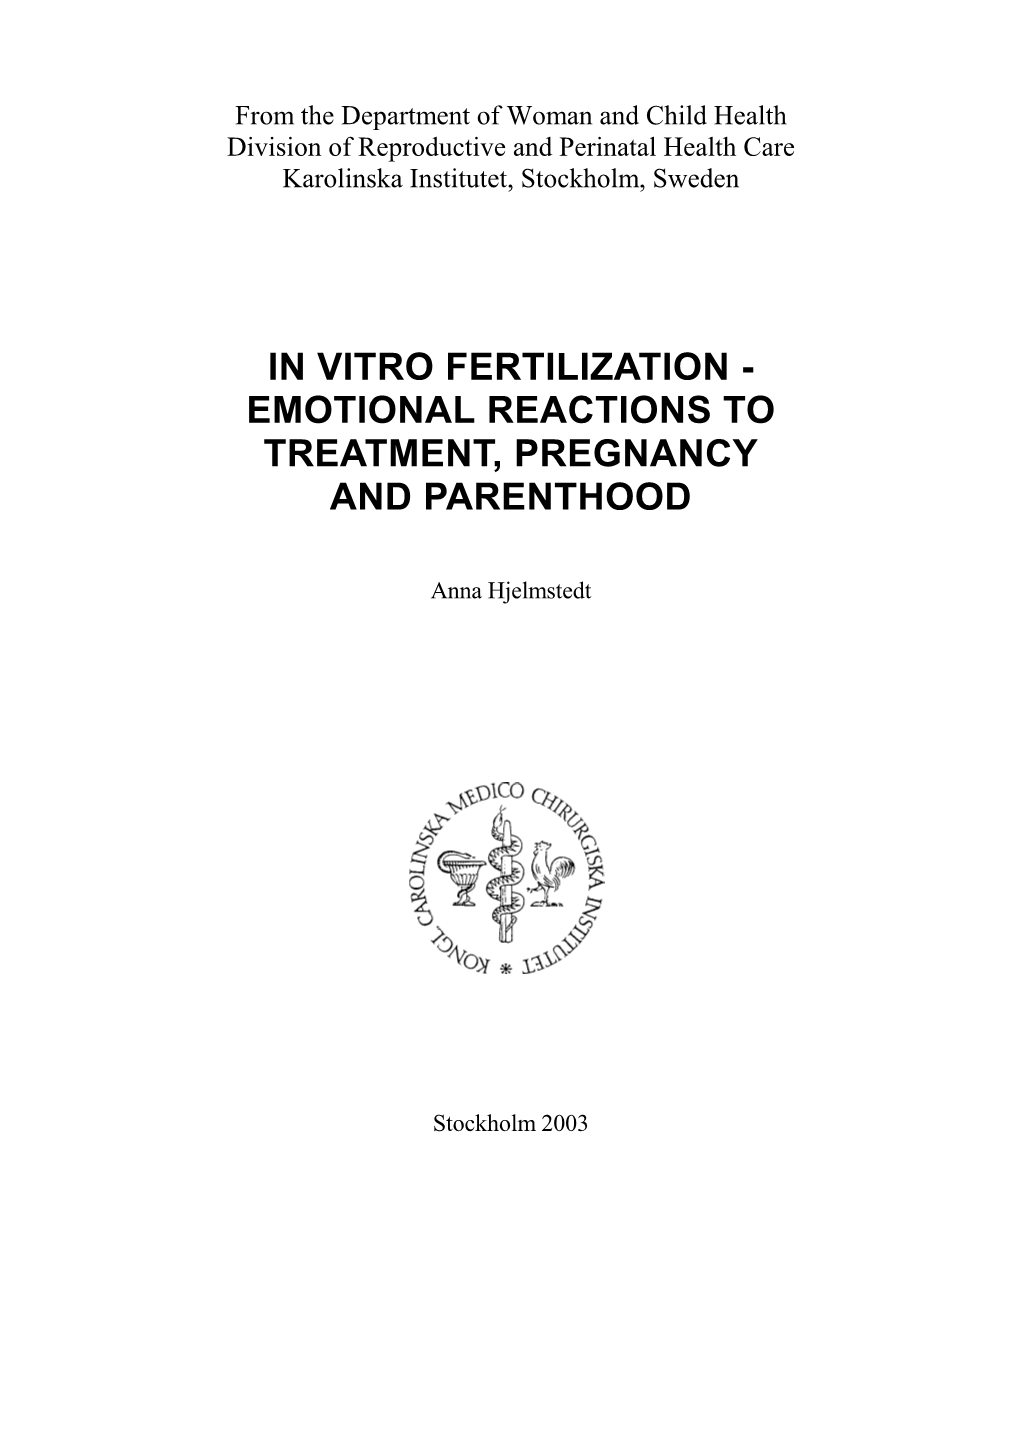 In Vitro Fertilization - Emotional Reactions to Treatment, Pregnancy and Parenthood